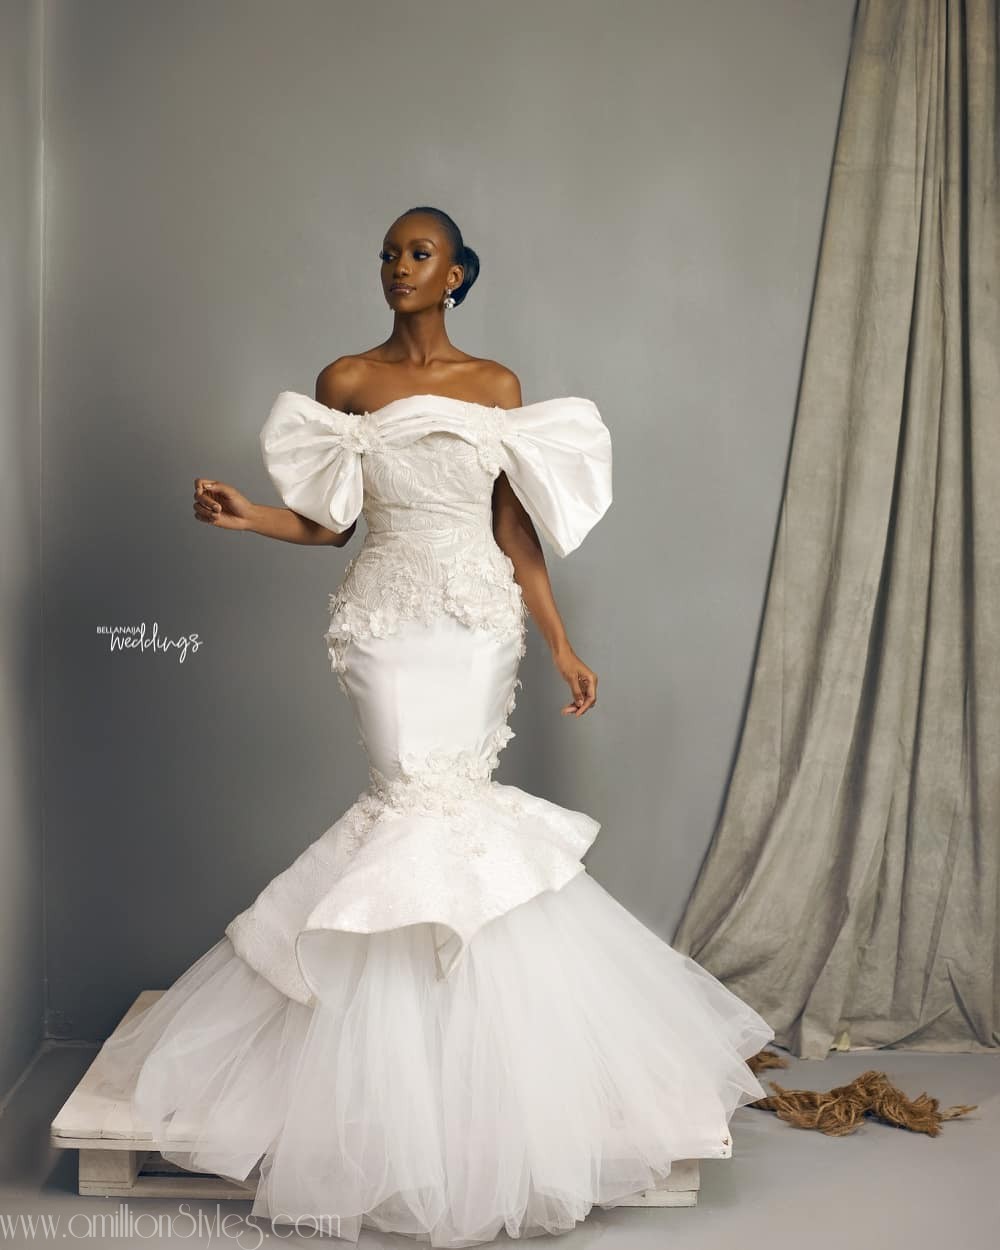 Which Of These Wedding Gowns By Tubo Would You Wear?